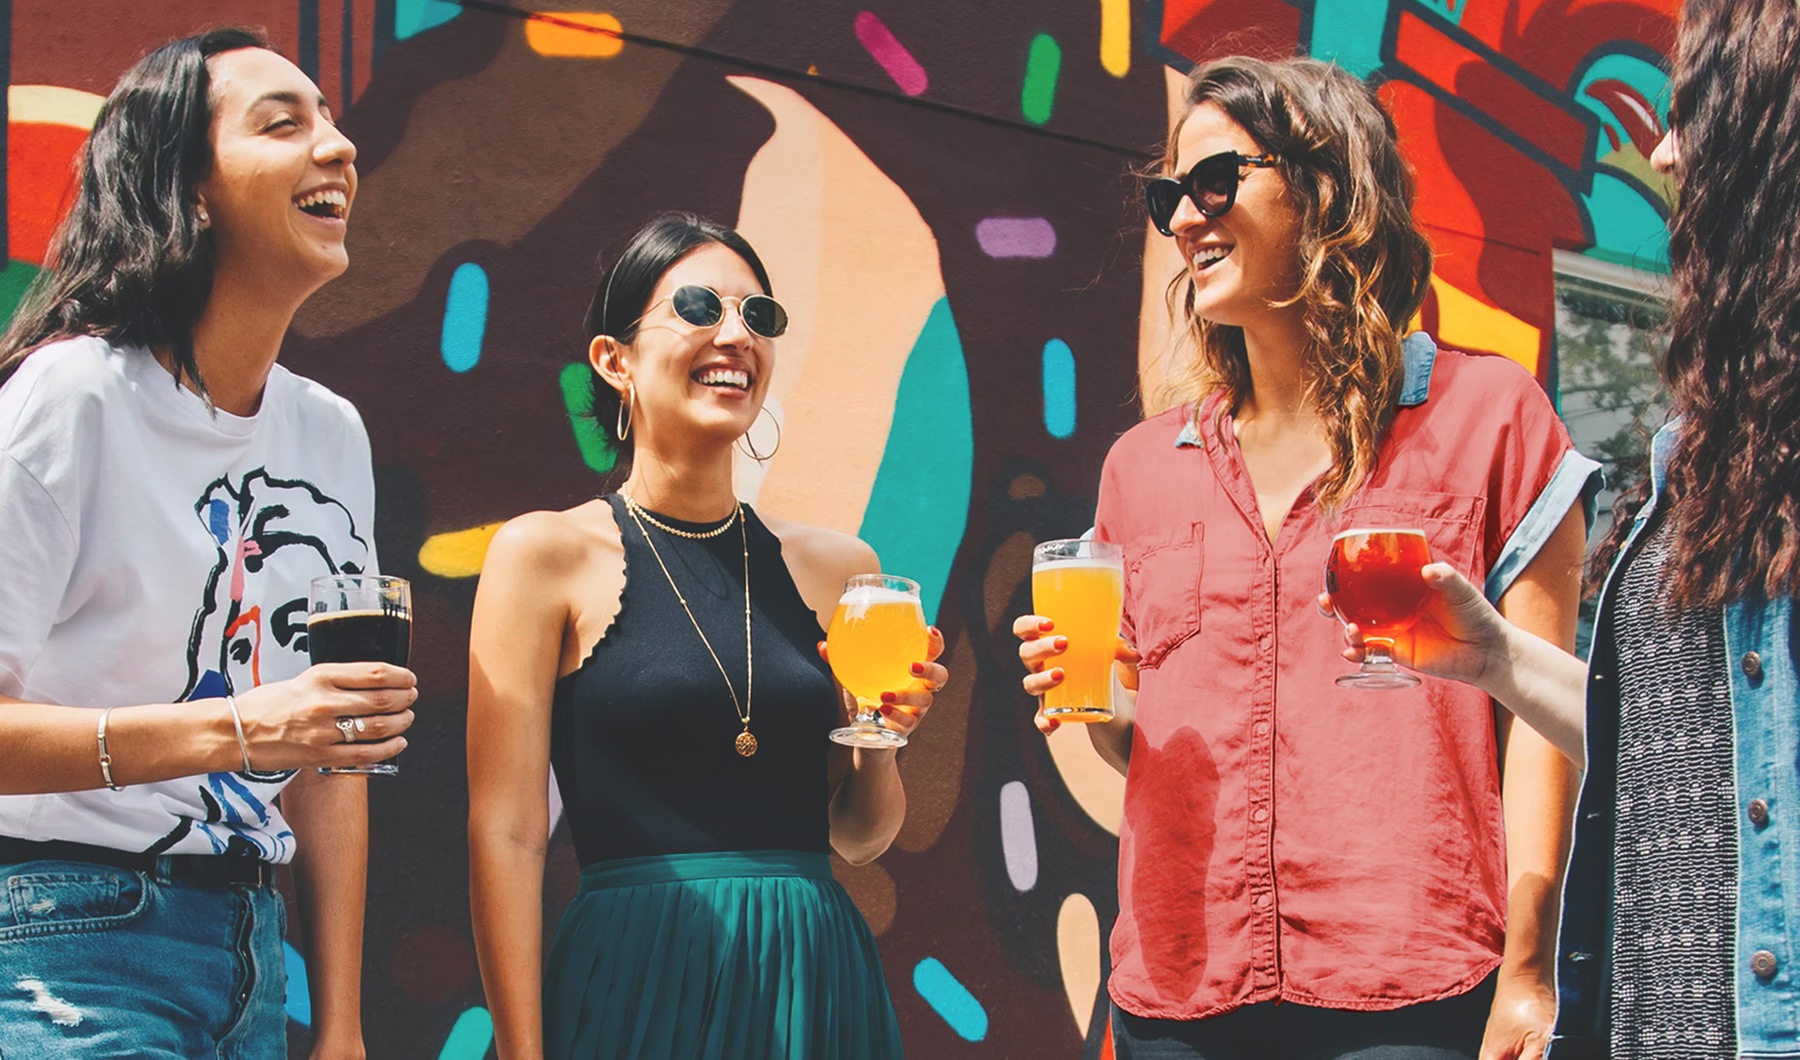 lifestyle image of people standing with drinks in-hand in front of a large colorful mural